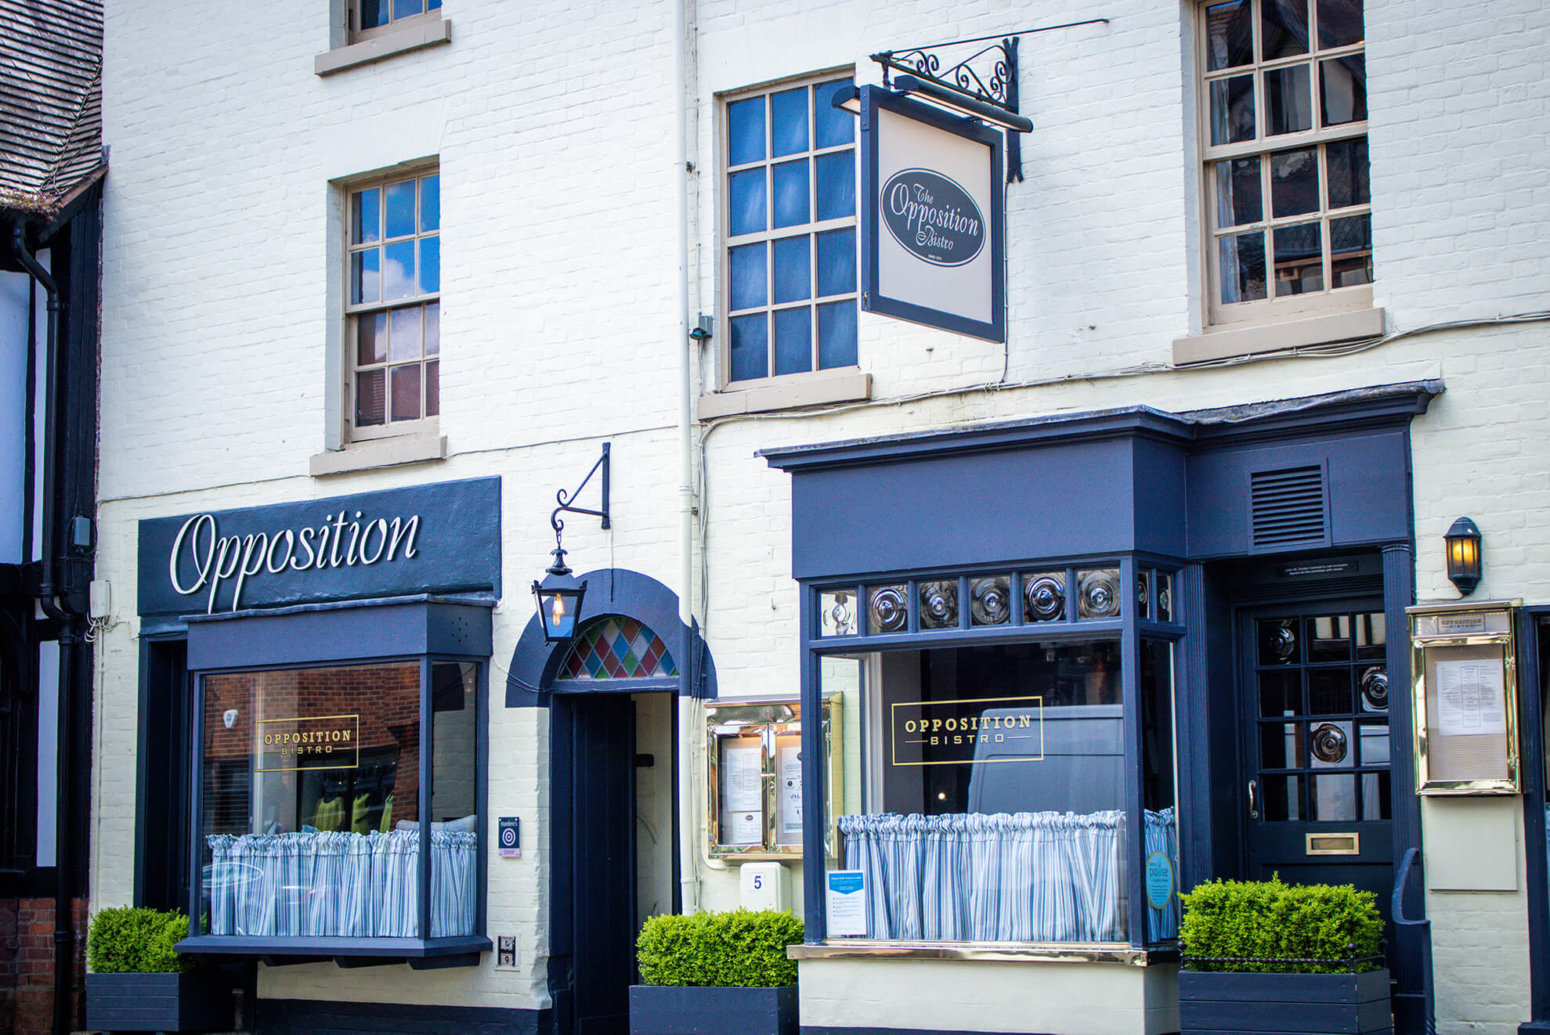 The Opposition, a fantastic dining experience in Stratford-Upon-Avon